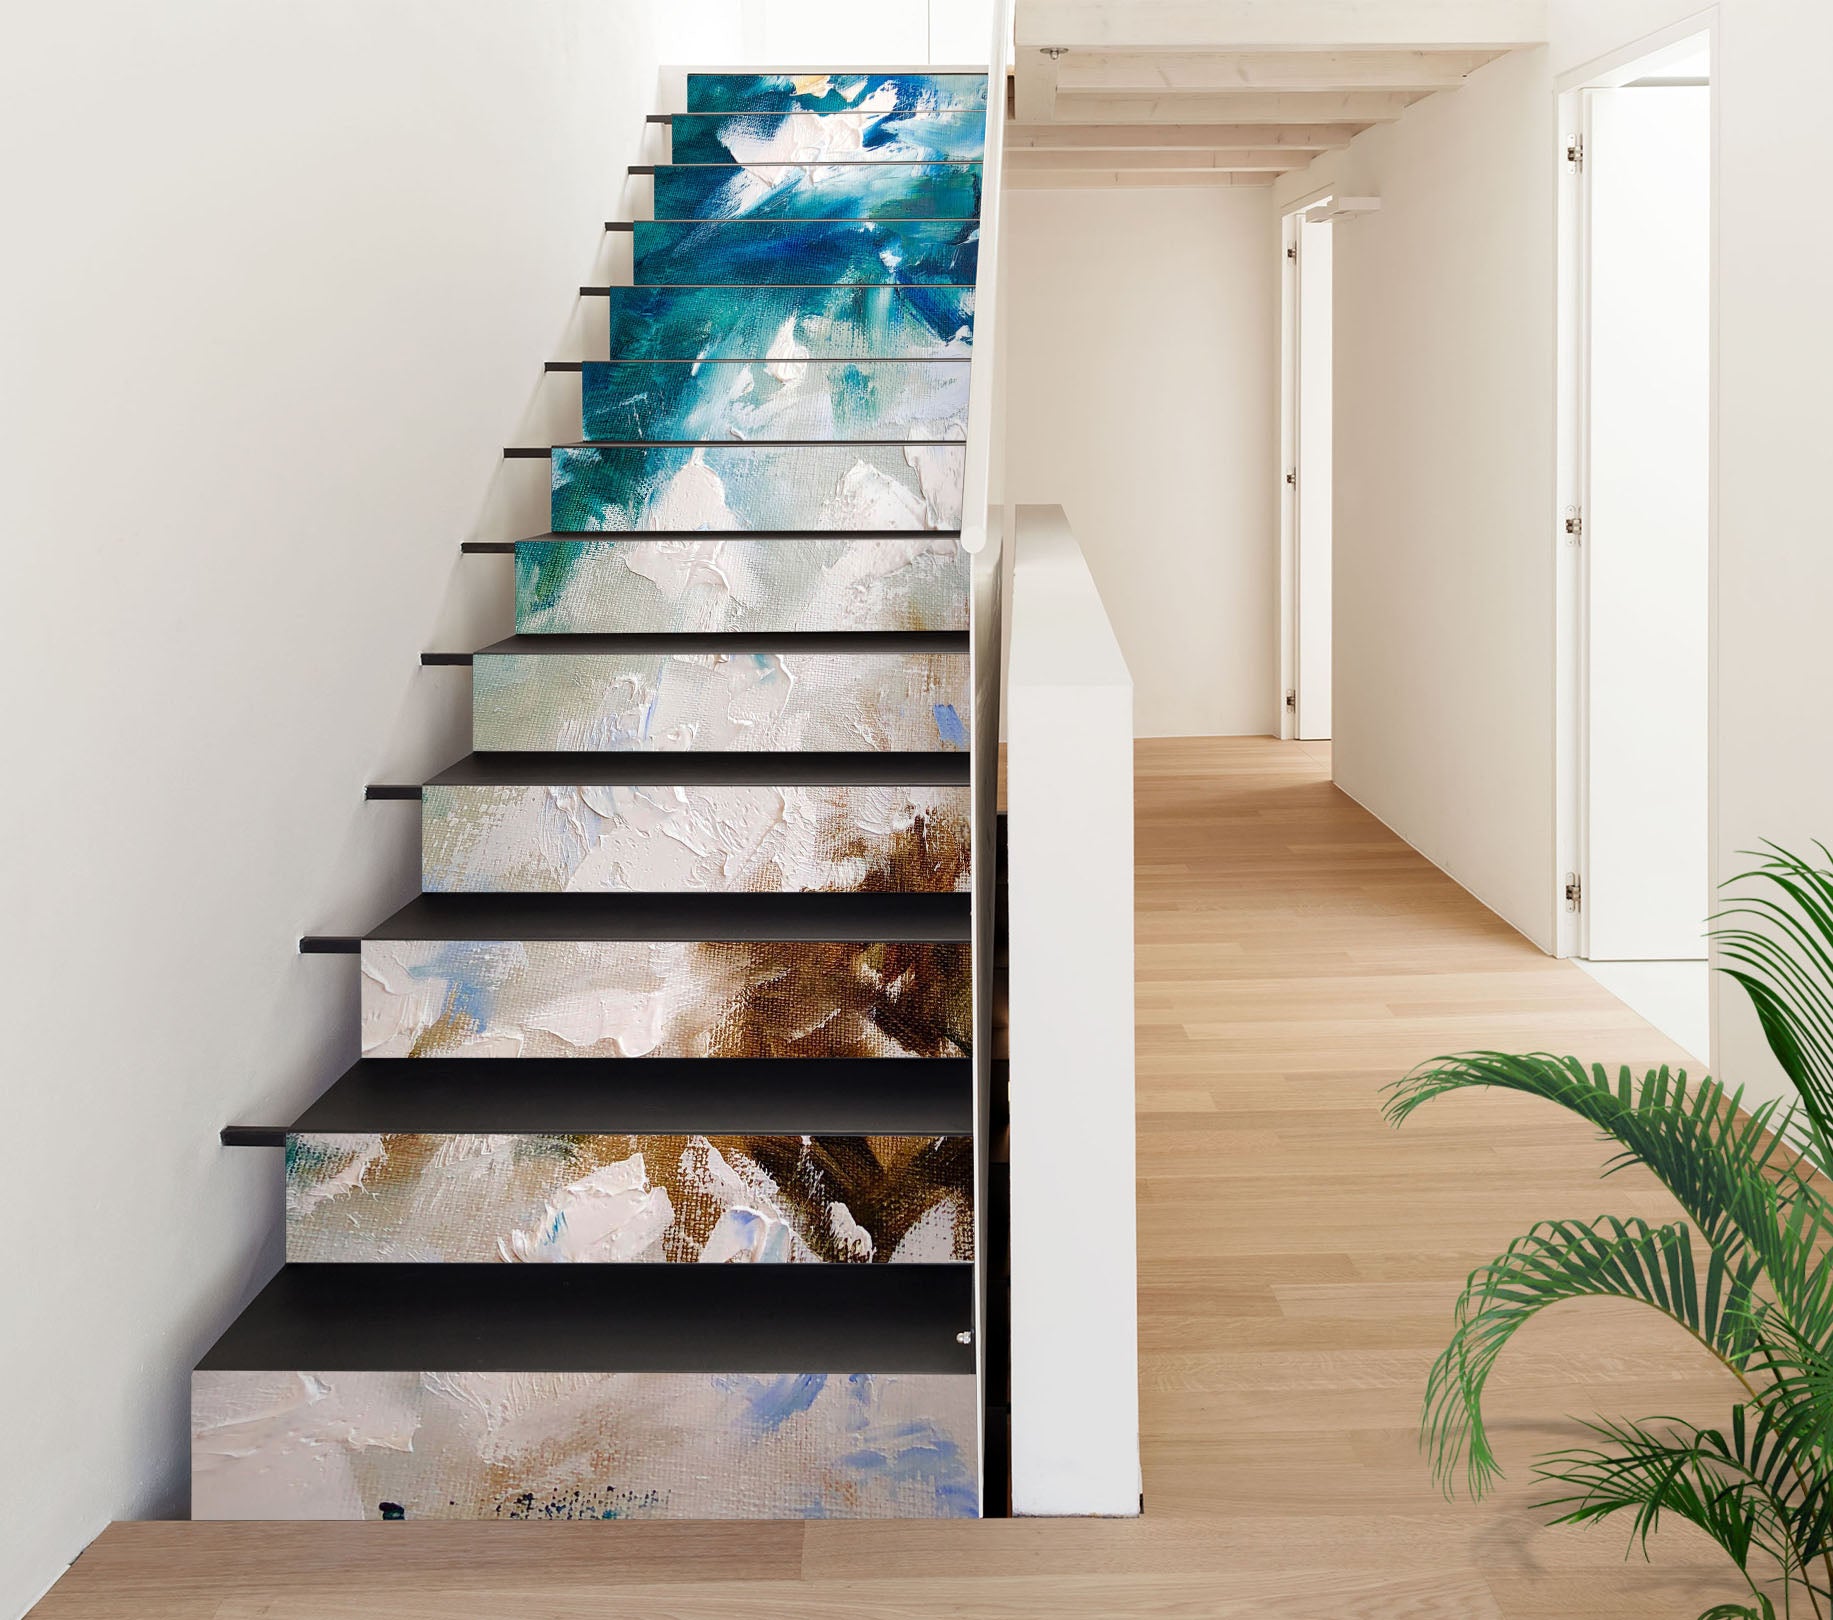 3D Painted Pigments 2206 Skromova Marina Stair Risers